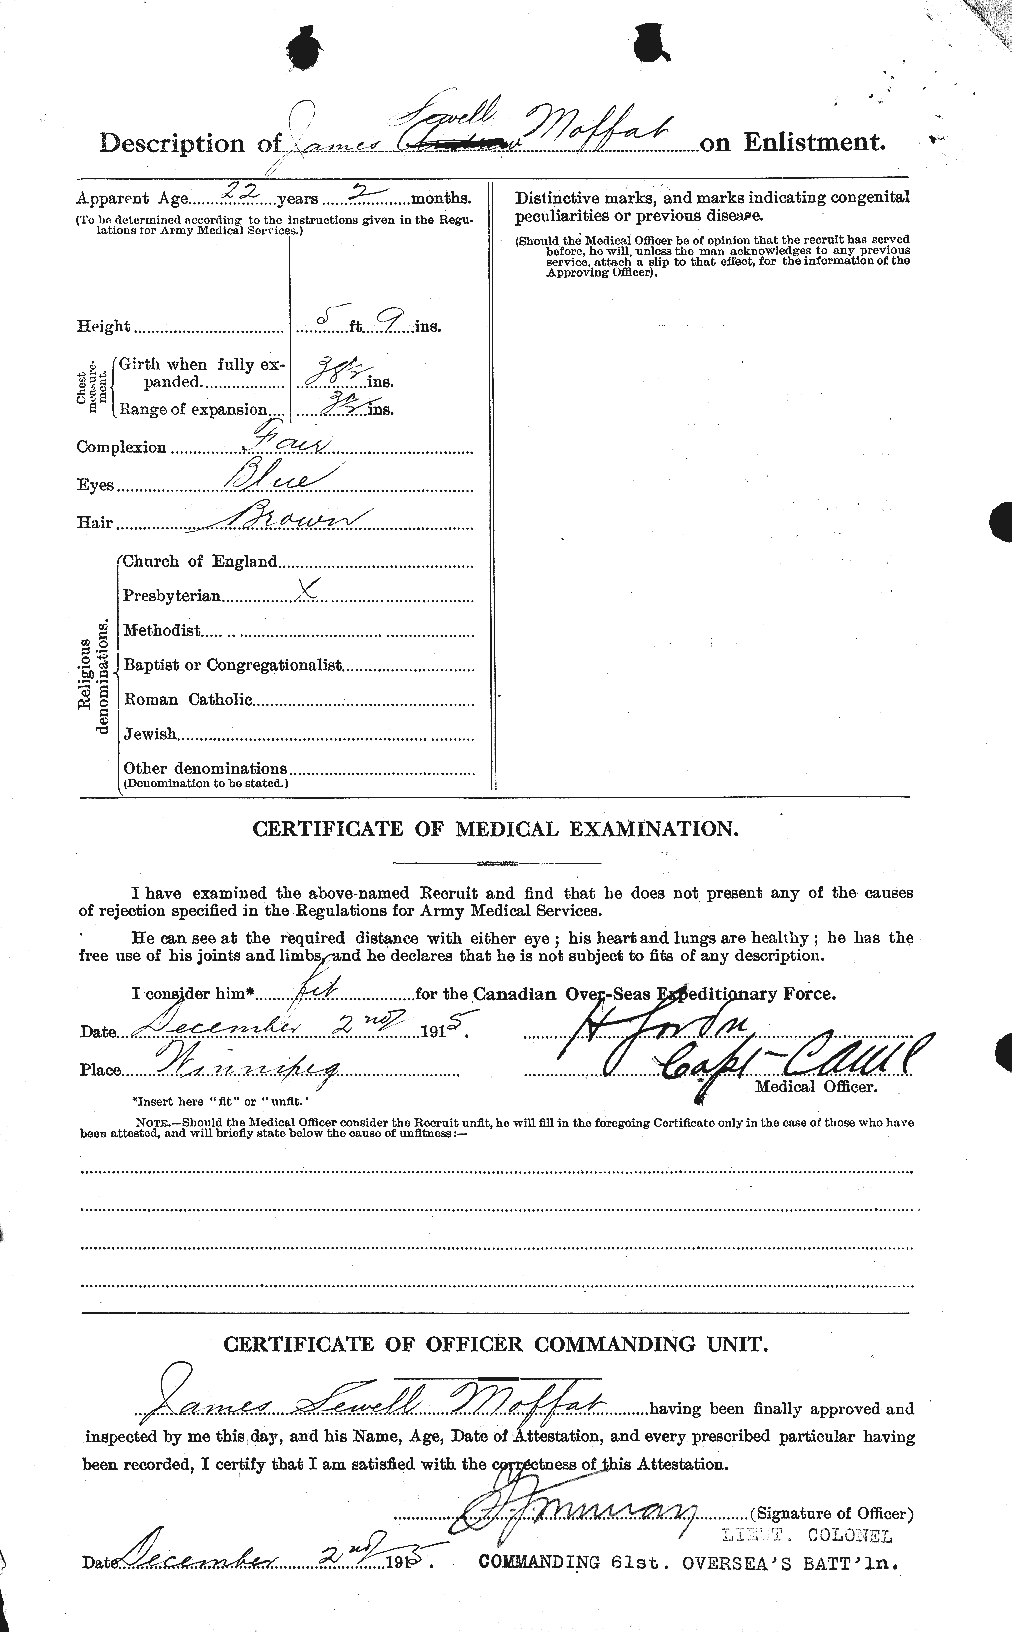 Personnel Records of the First World War - CEF 499039b